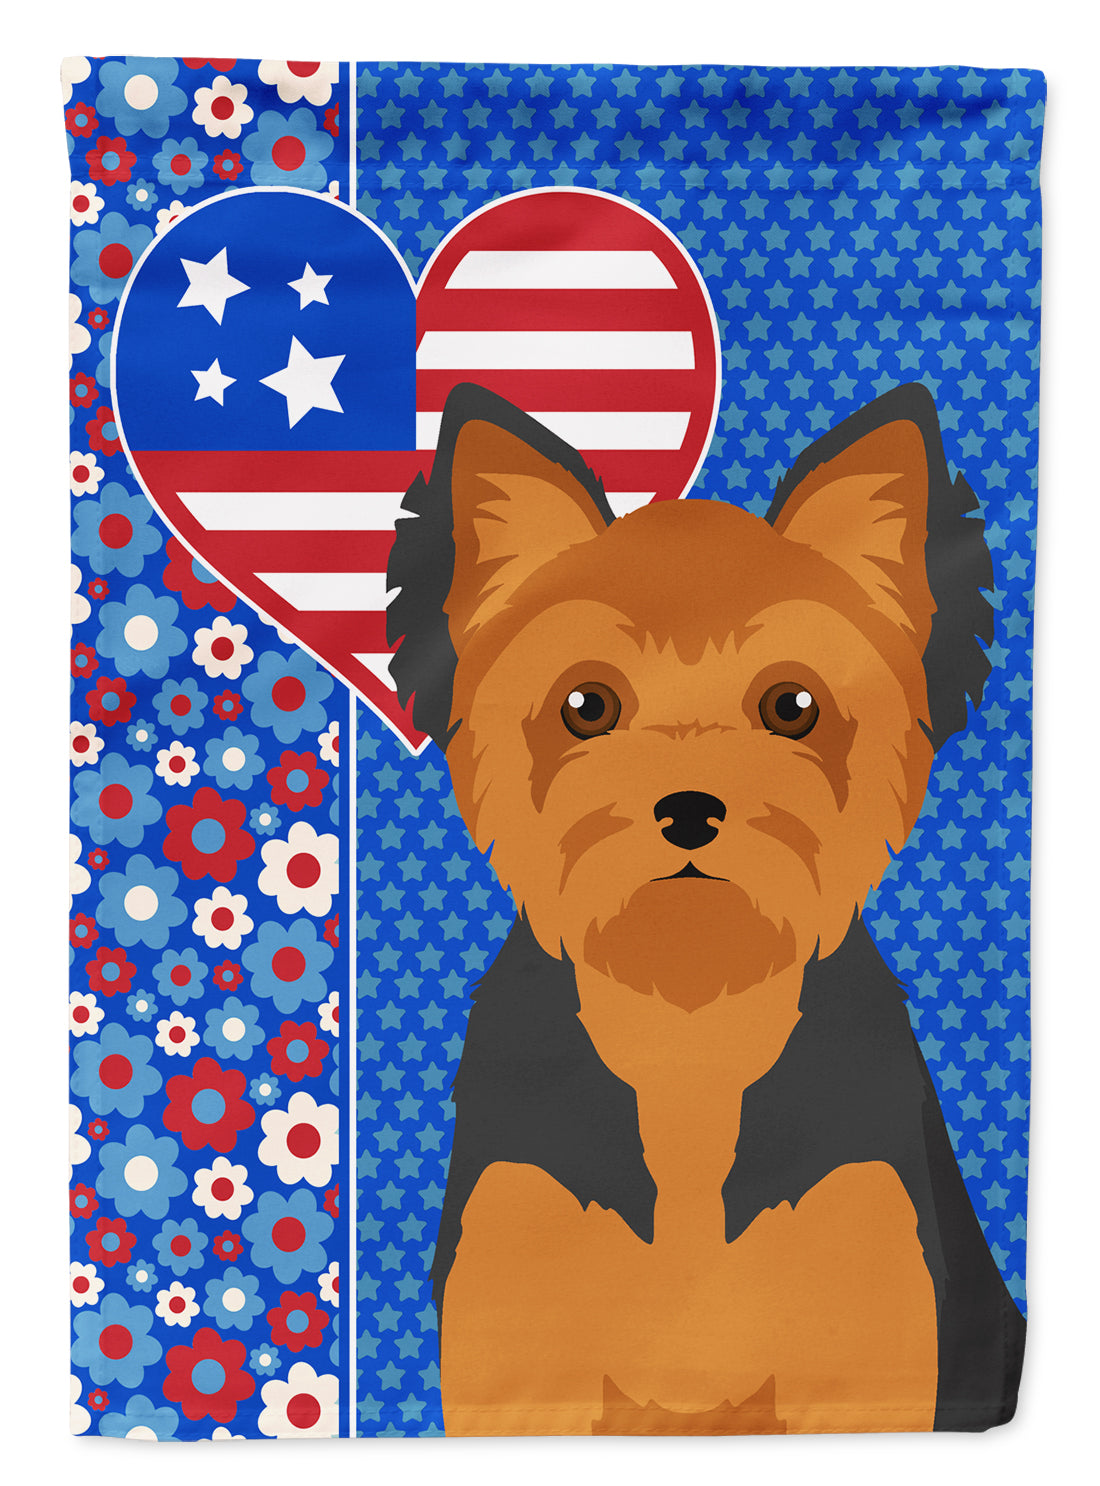 Black and Tan Puppy Cut Yorkshire Terrier USA American Flag Garden Size  the-store.com.